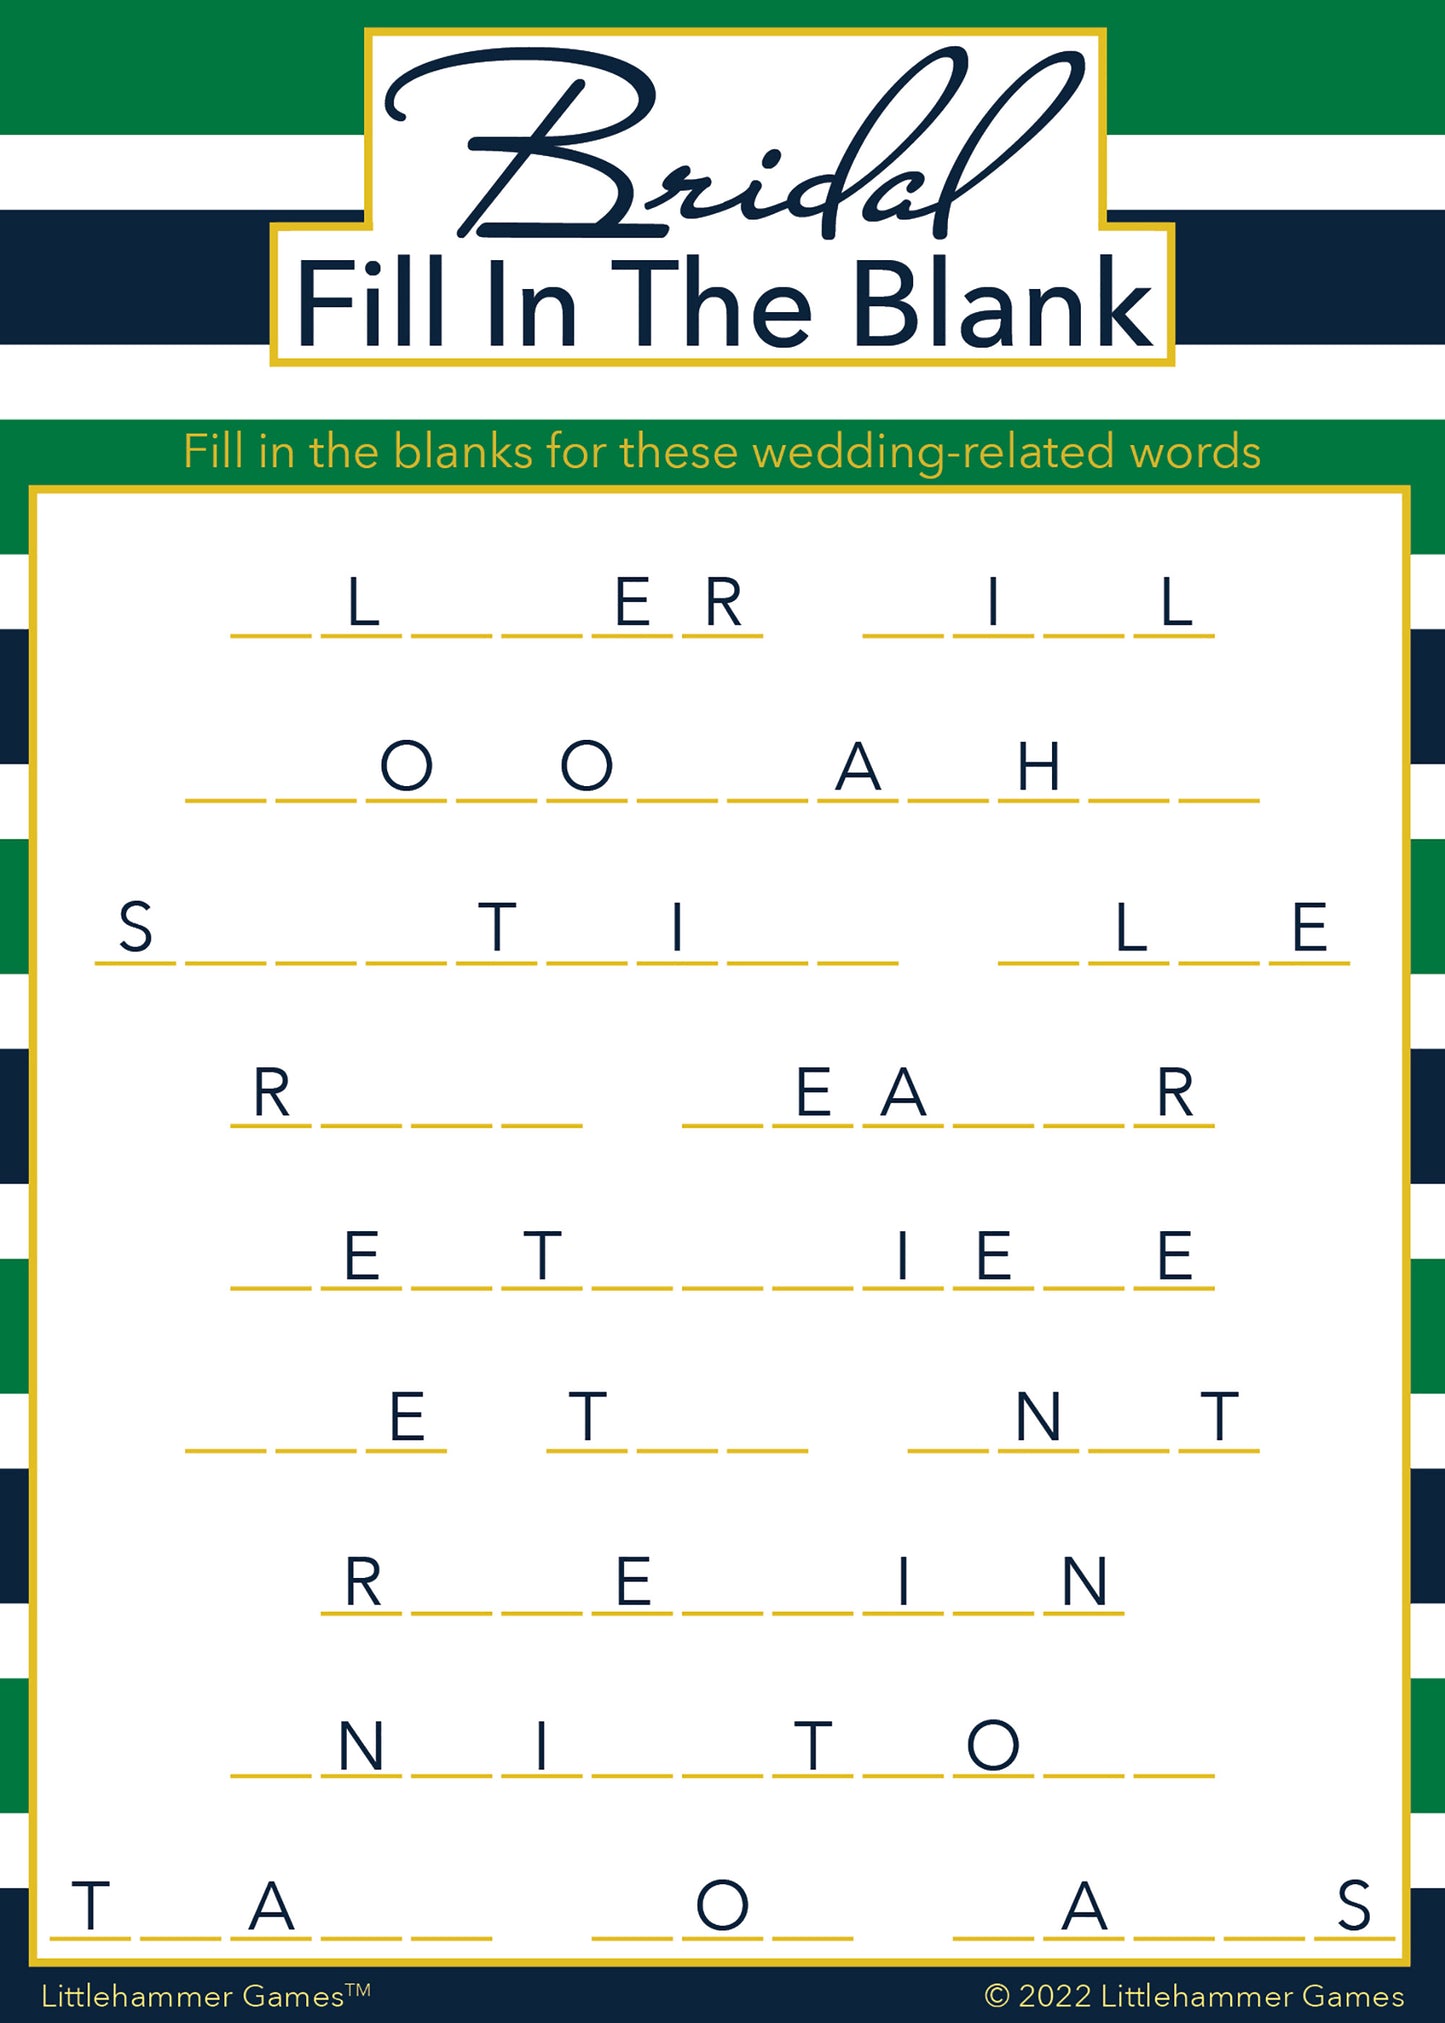 Bridal Fill in the Blank game card with a green and navy-striped background